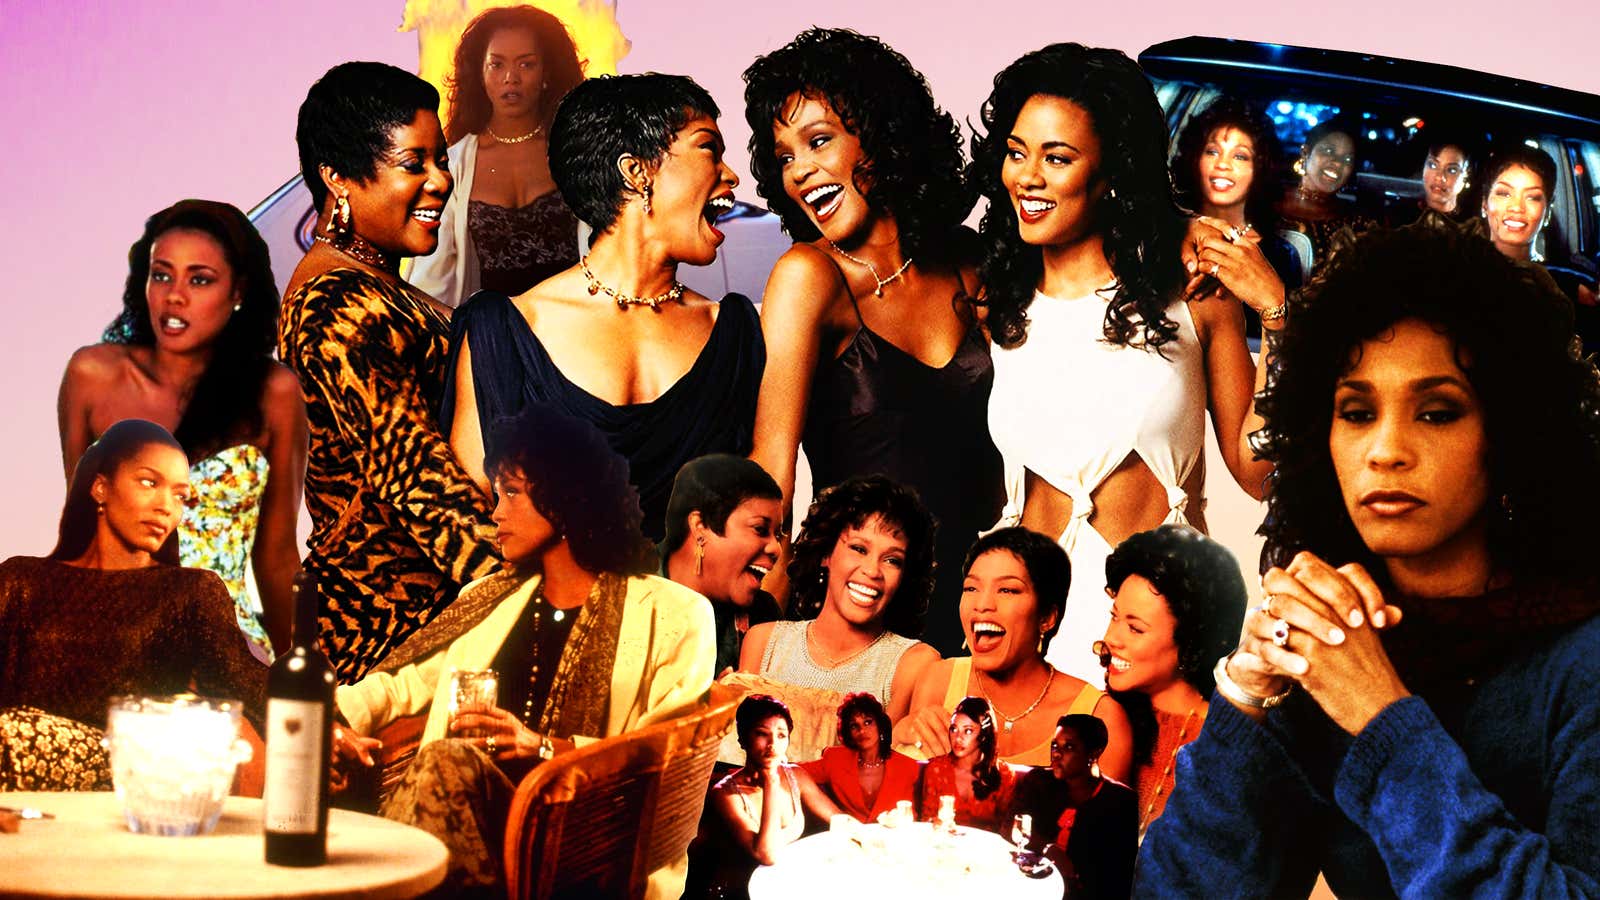 The Dynamic Glamour of Black Women in <i>Waiting to Exhale</i>